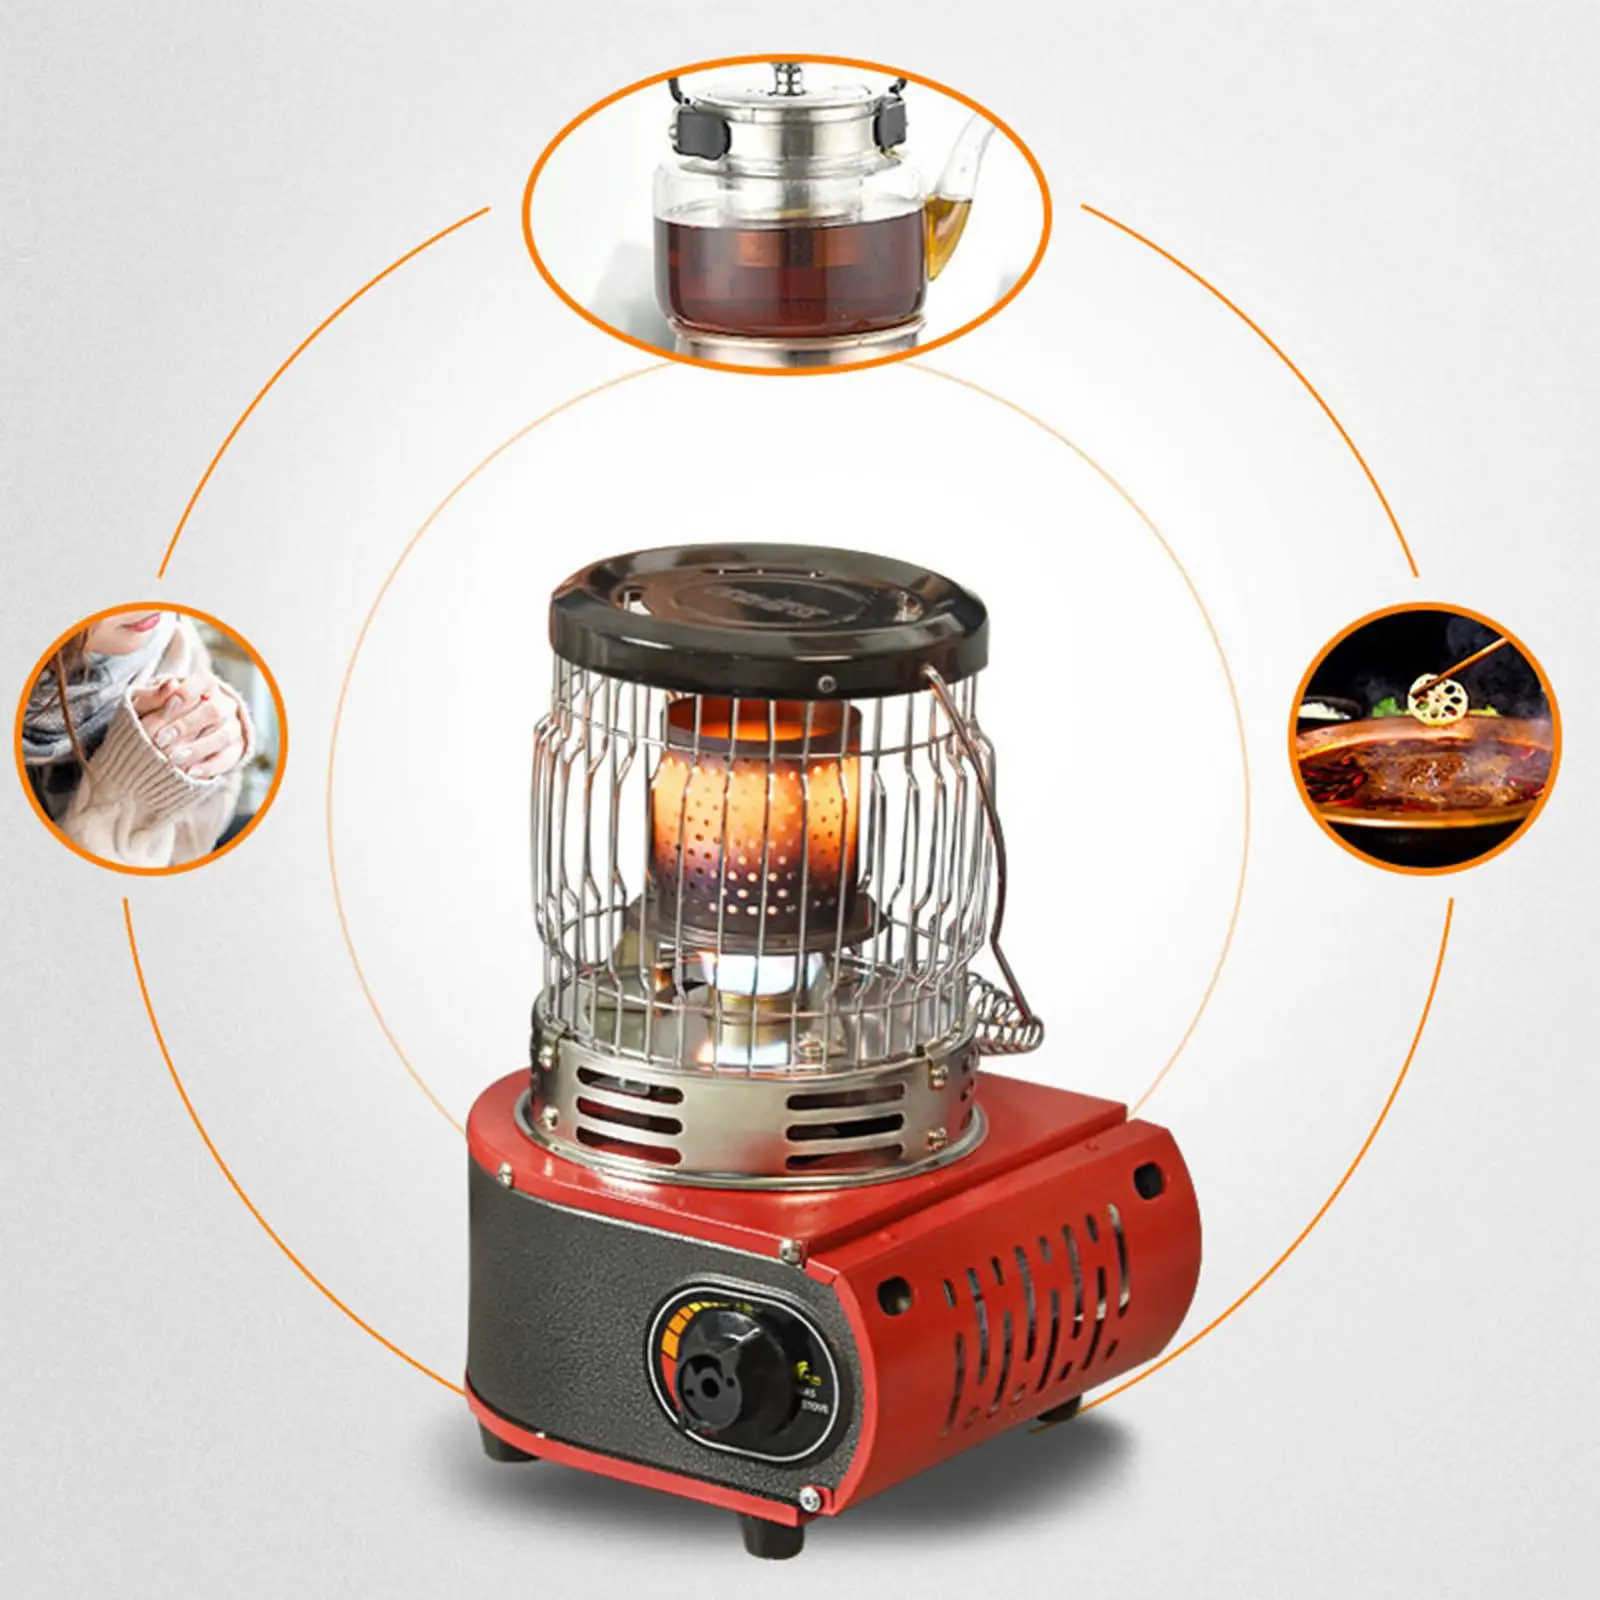 burning-carry-stainless-portable-heater-for-outdoor-camping-cooking